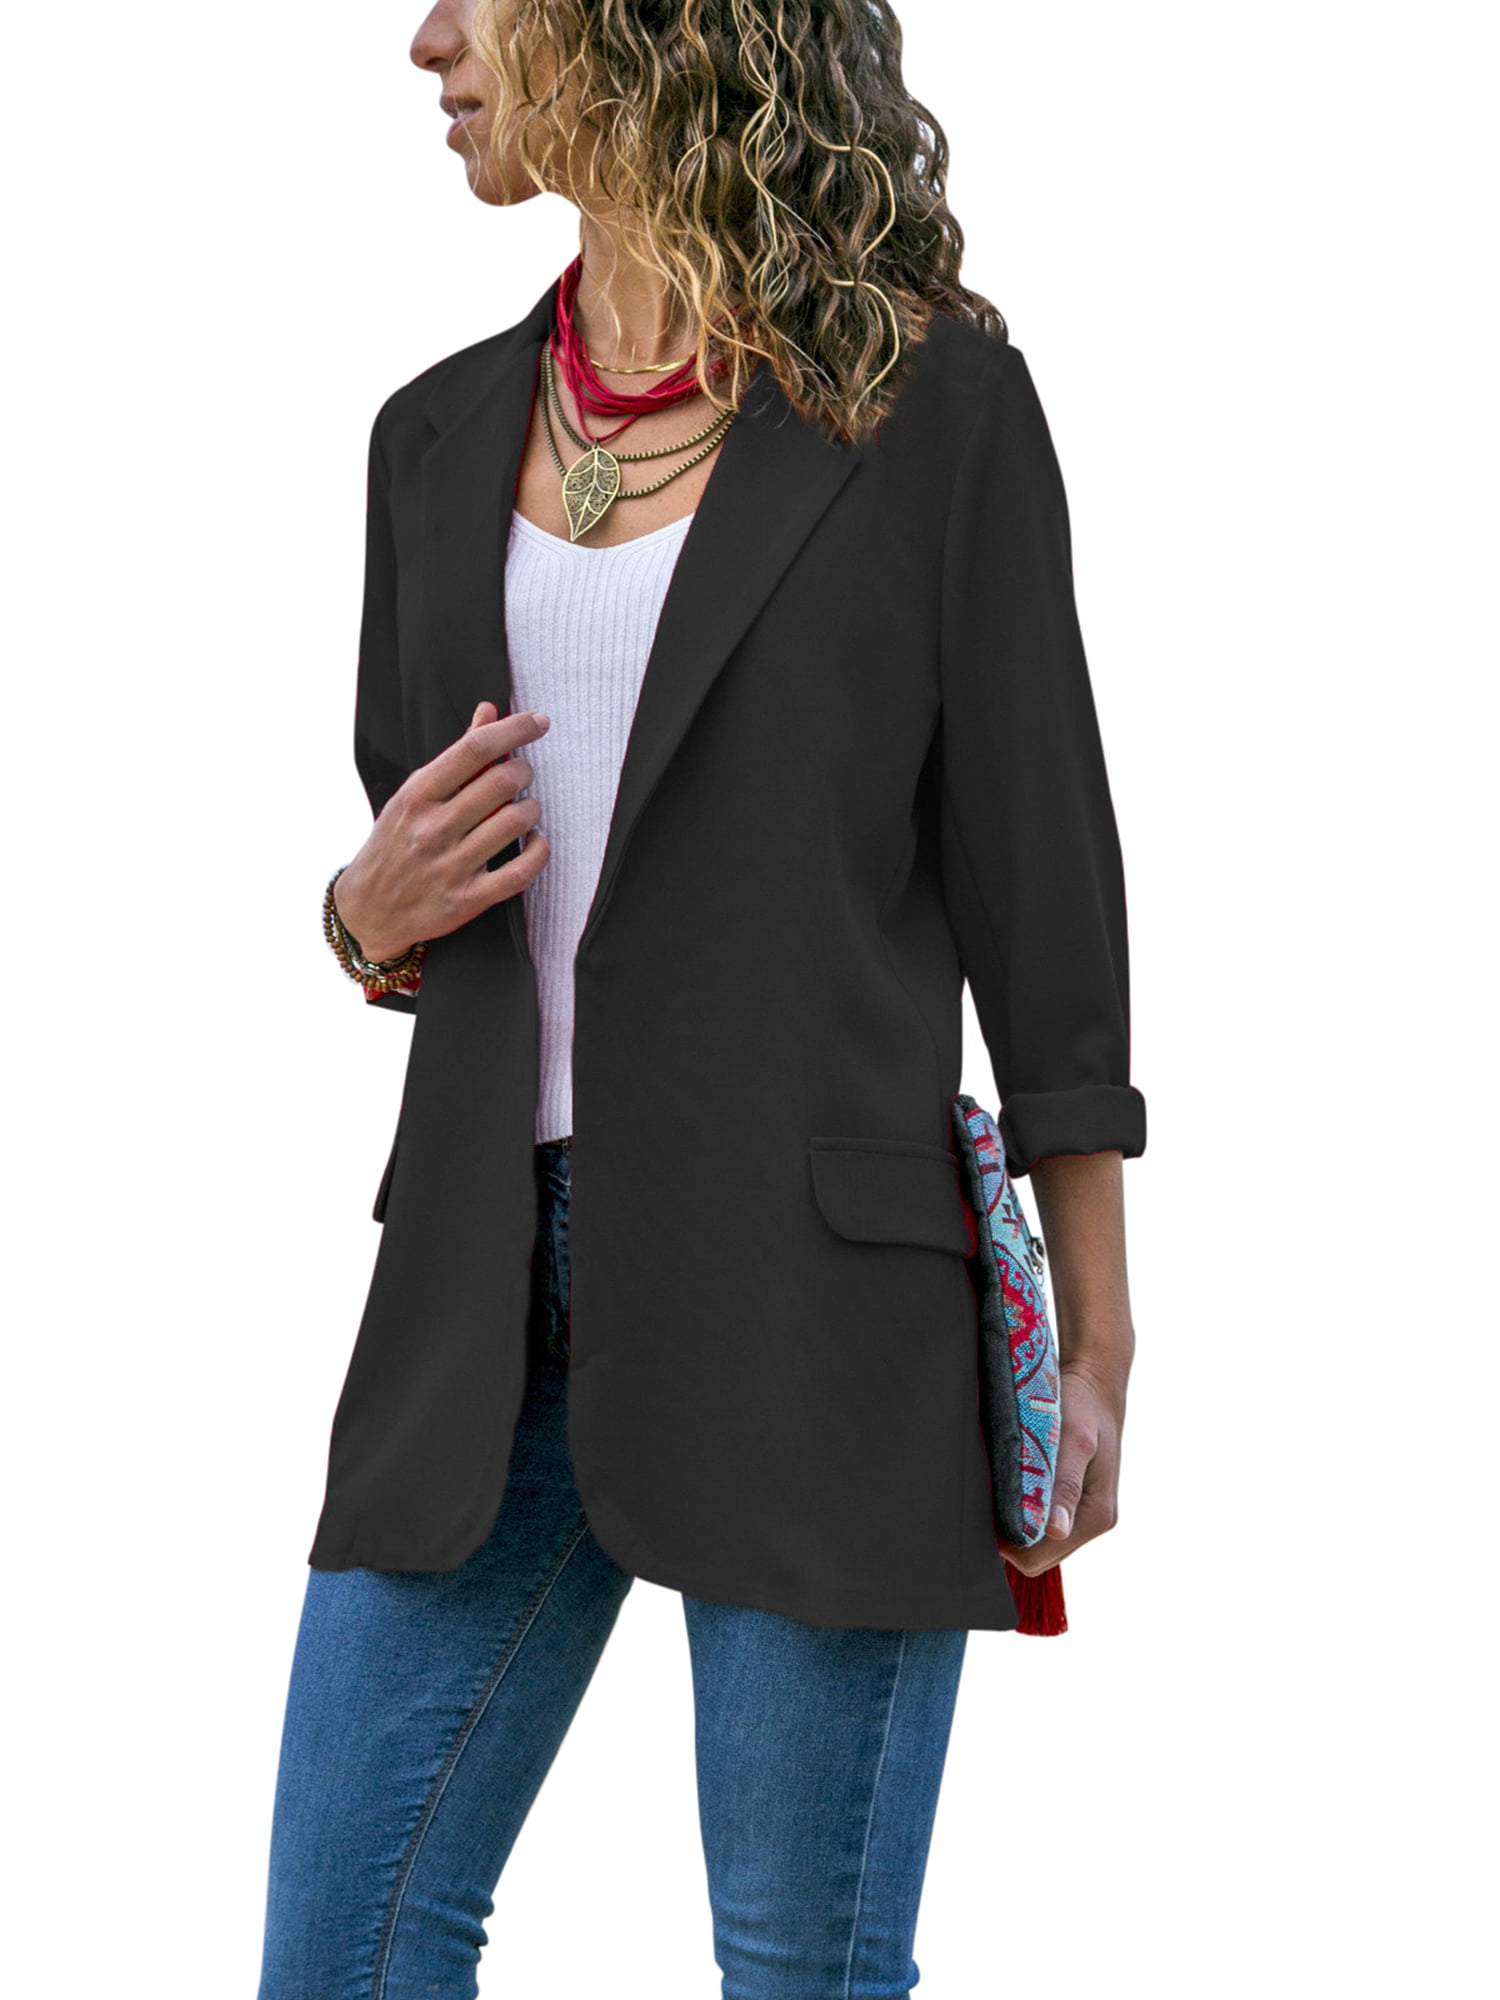 Fashion Office Jackets,Women Ladies Solid Slim Buttons Outwear Winter Working Casual Coat